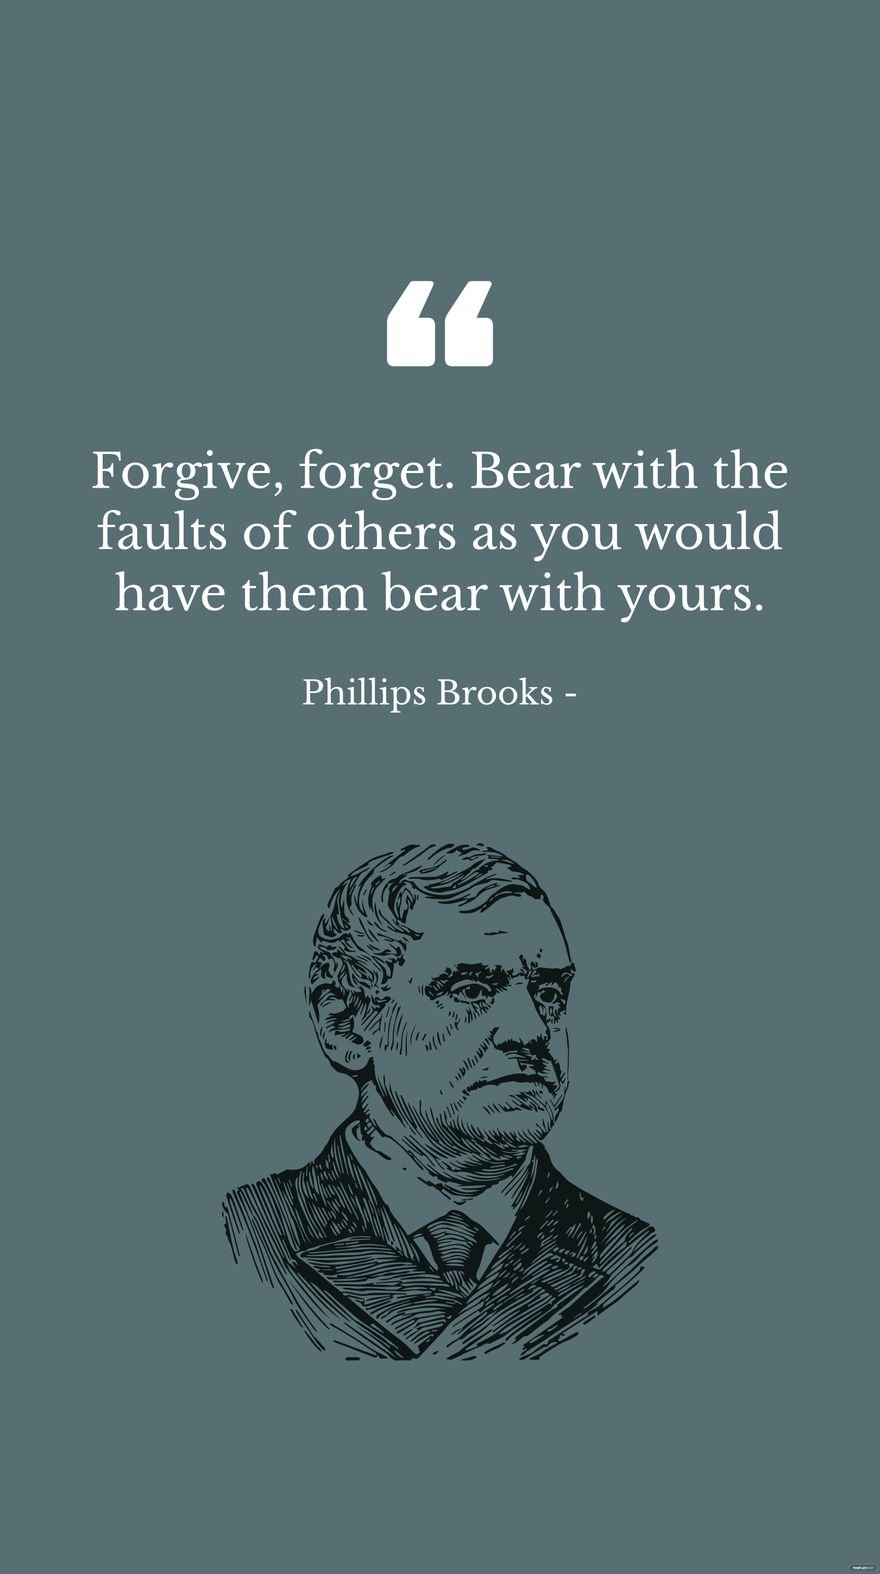 Free Phillips Brooks - Forgive, forget. Bear with the faults of others as you would have them bear with yours. in JPG